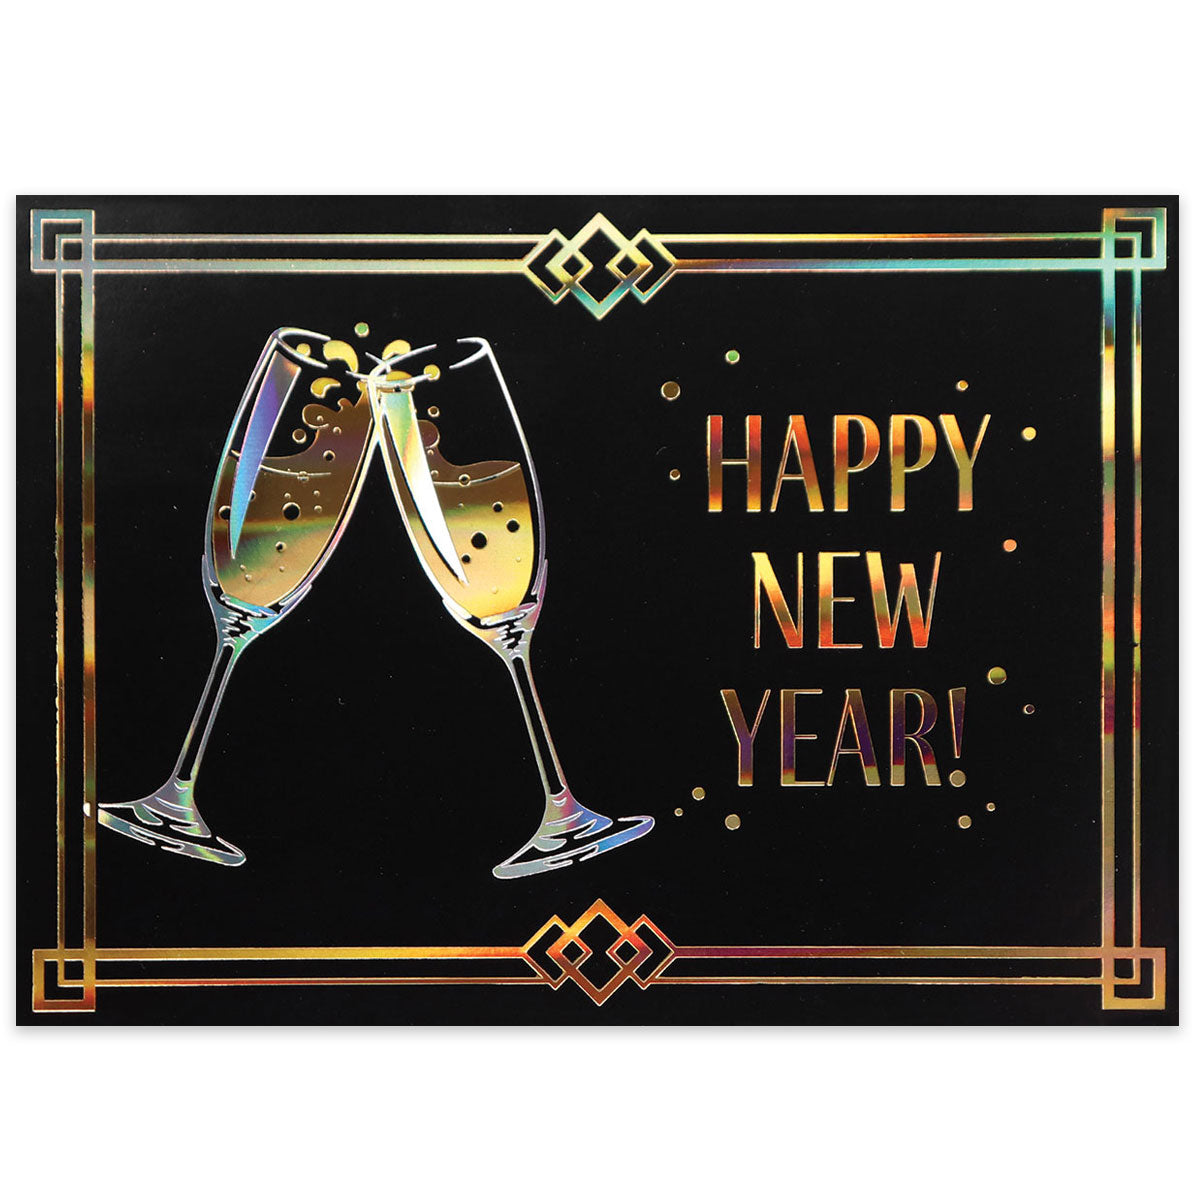 Black card with holigraphic gold and silver foil design of two champagne glasses being clinked with a new year greeting in gold.